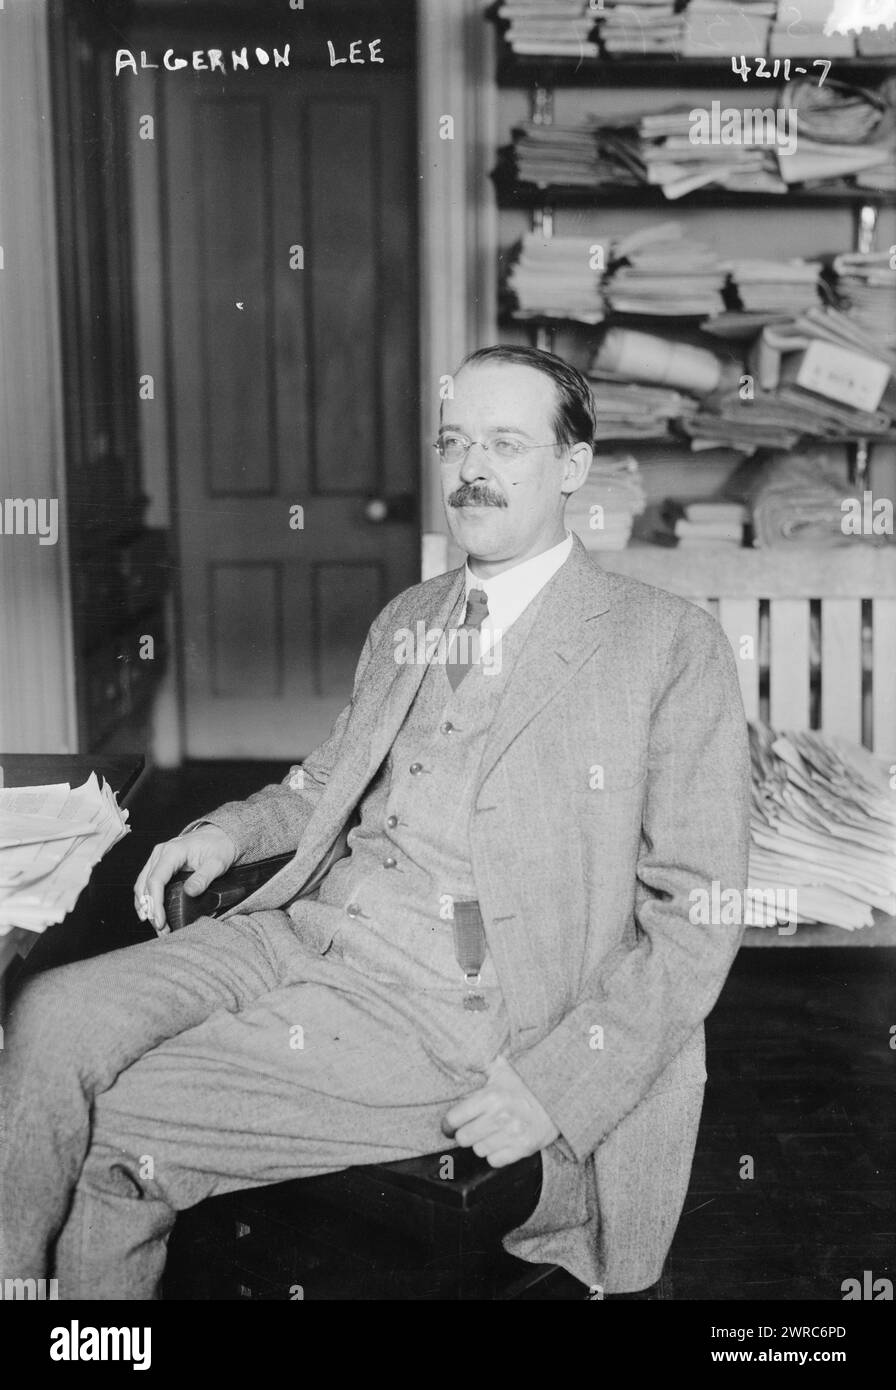 Algernon Lee, Photograph shows Algernon Lee (1873-1954), an American socialist politician and educator. In 1917, he was refused a passport to attend an international conference of socialists due to the Logan Law of 1799 which forbids individuals from engaging in international affairs without governmental authority., between ca. 1915 and ca. 1920, Glass negatives, 1 negative: glass Stock Photo